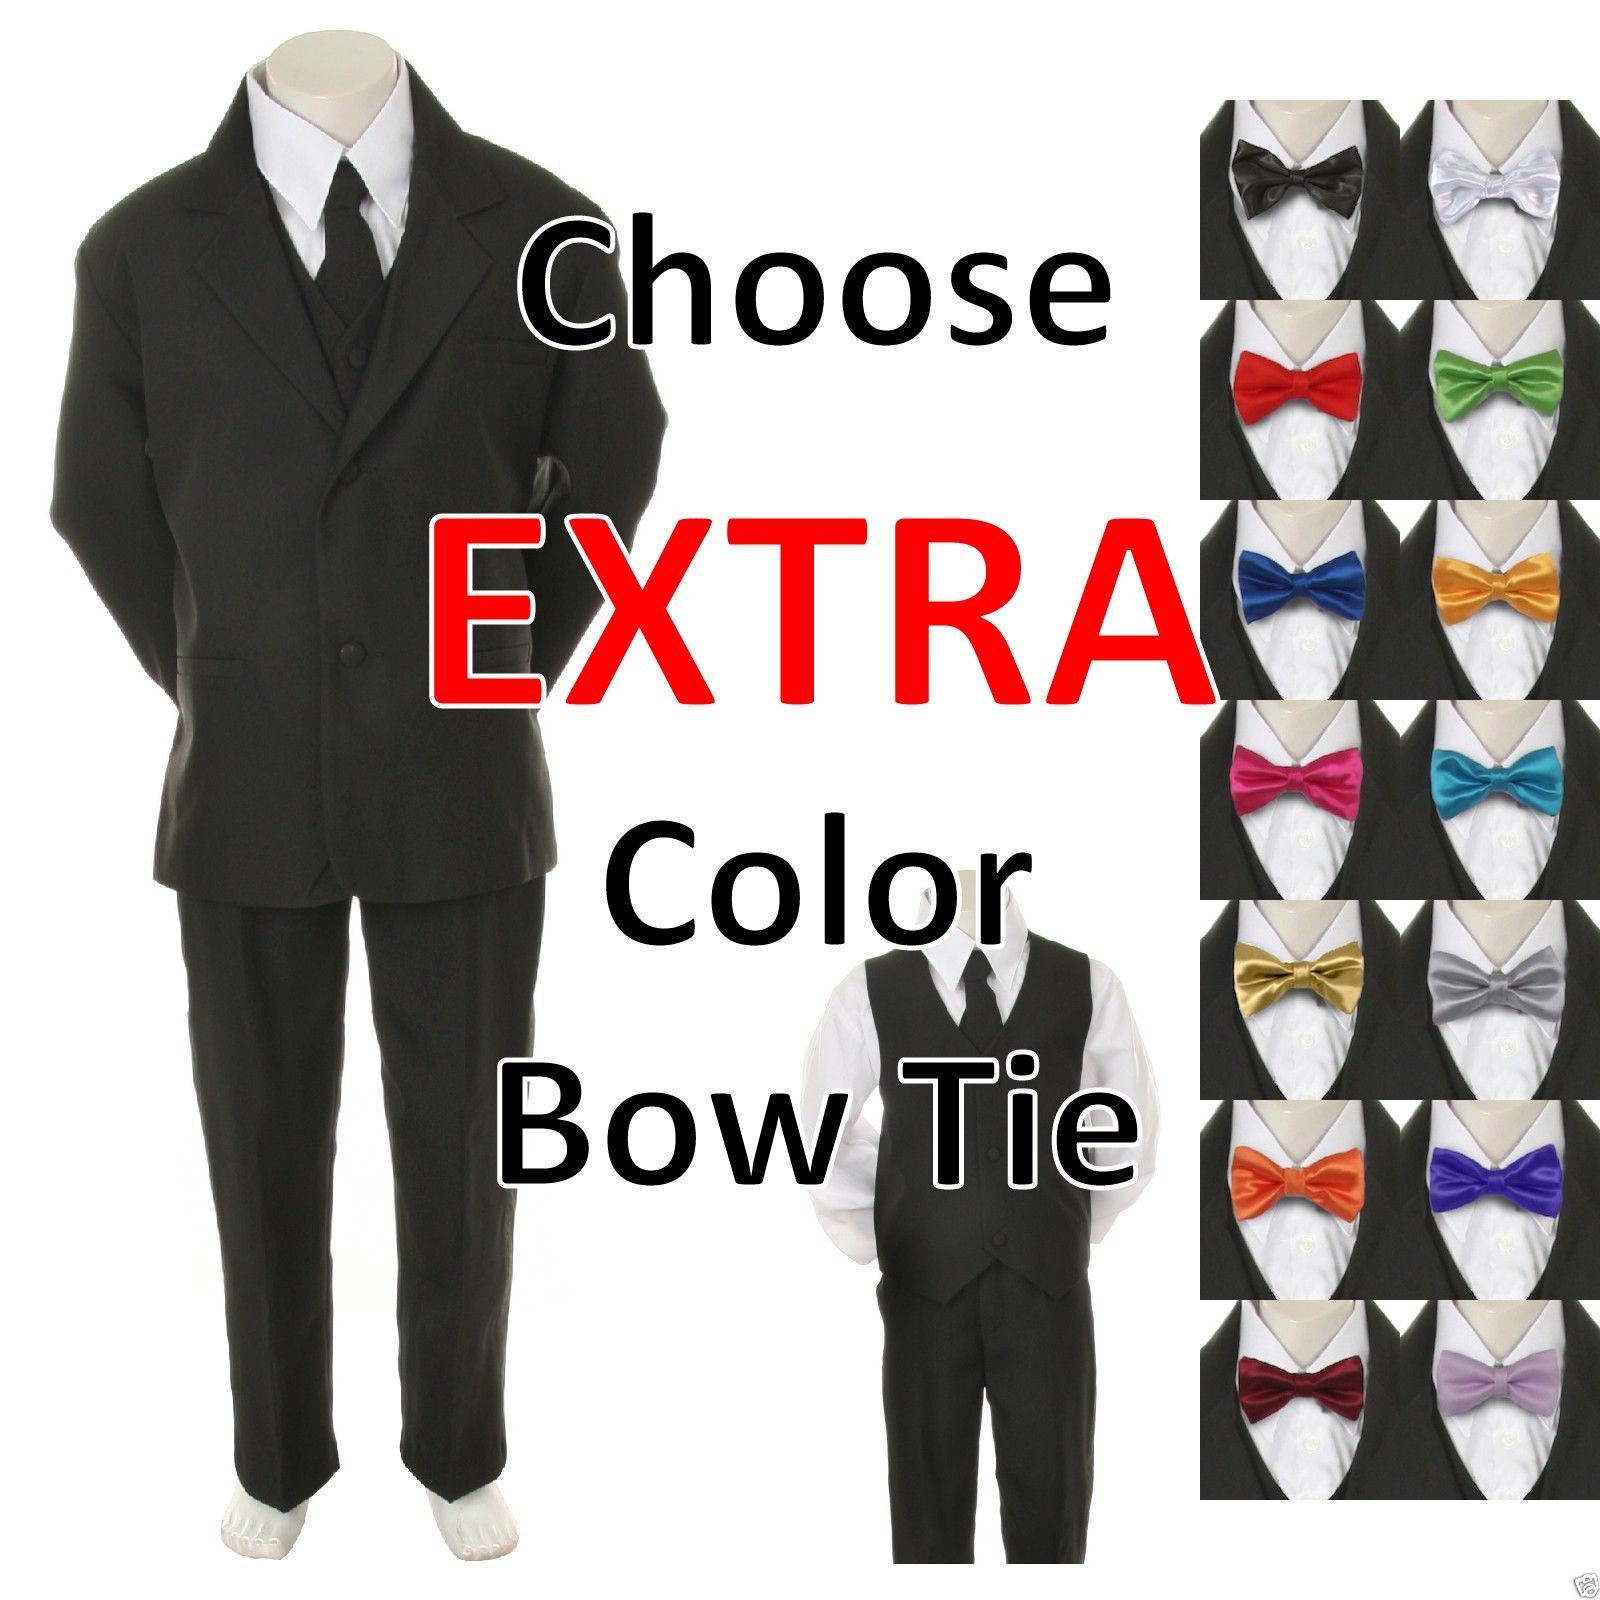 6pc Color Bow Tie + New Baby Toddler Boy Black Wedding Suit Tuxedo S-20 New Teen - image 1 of 1